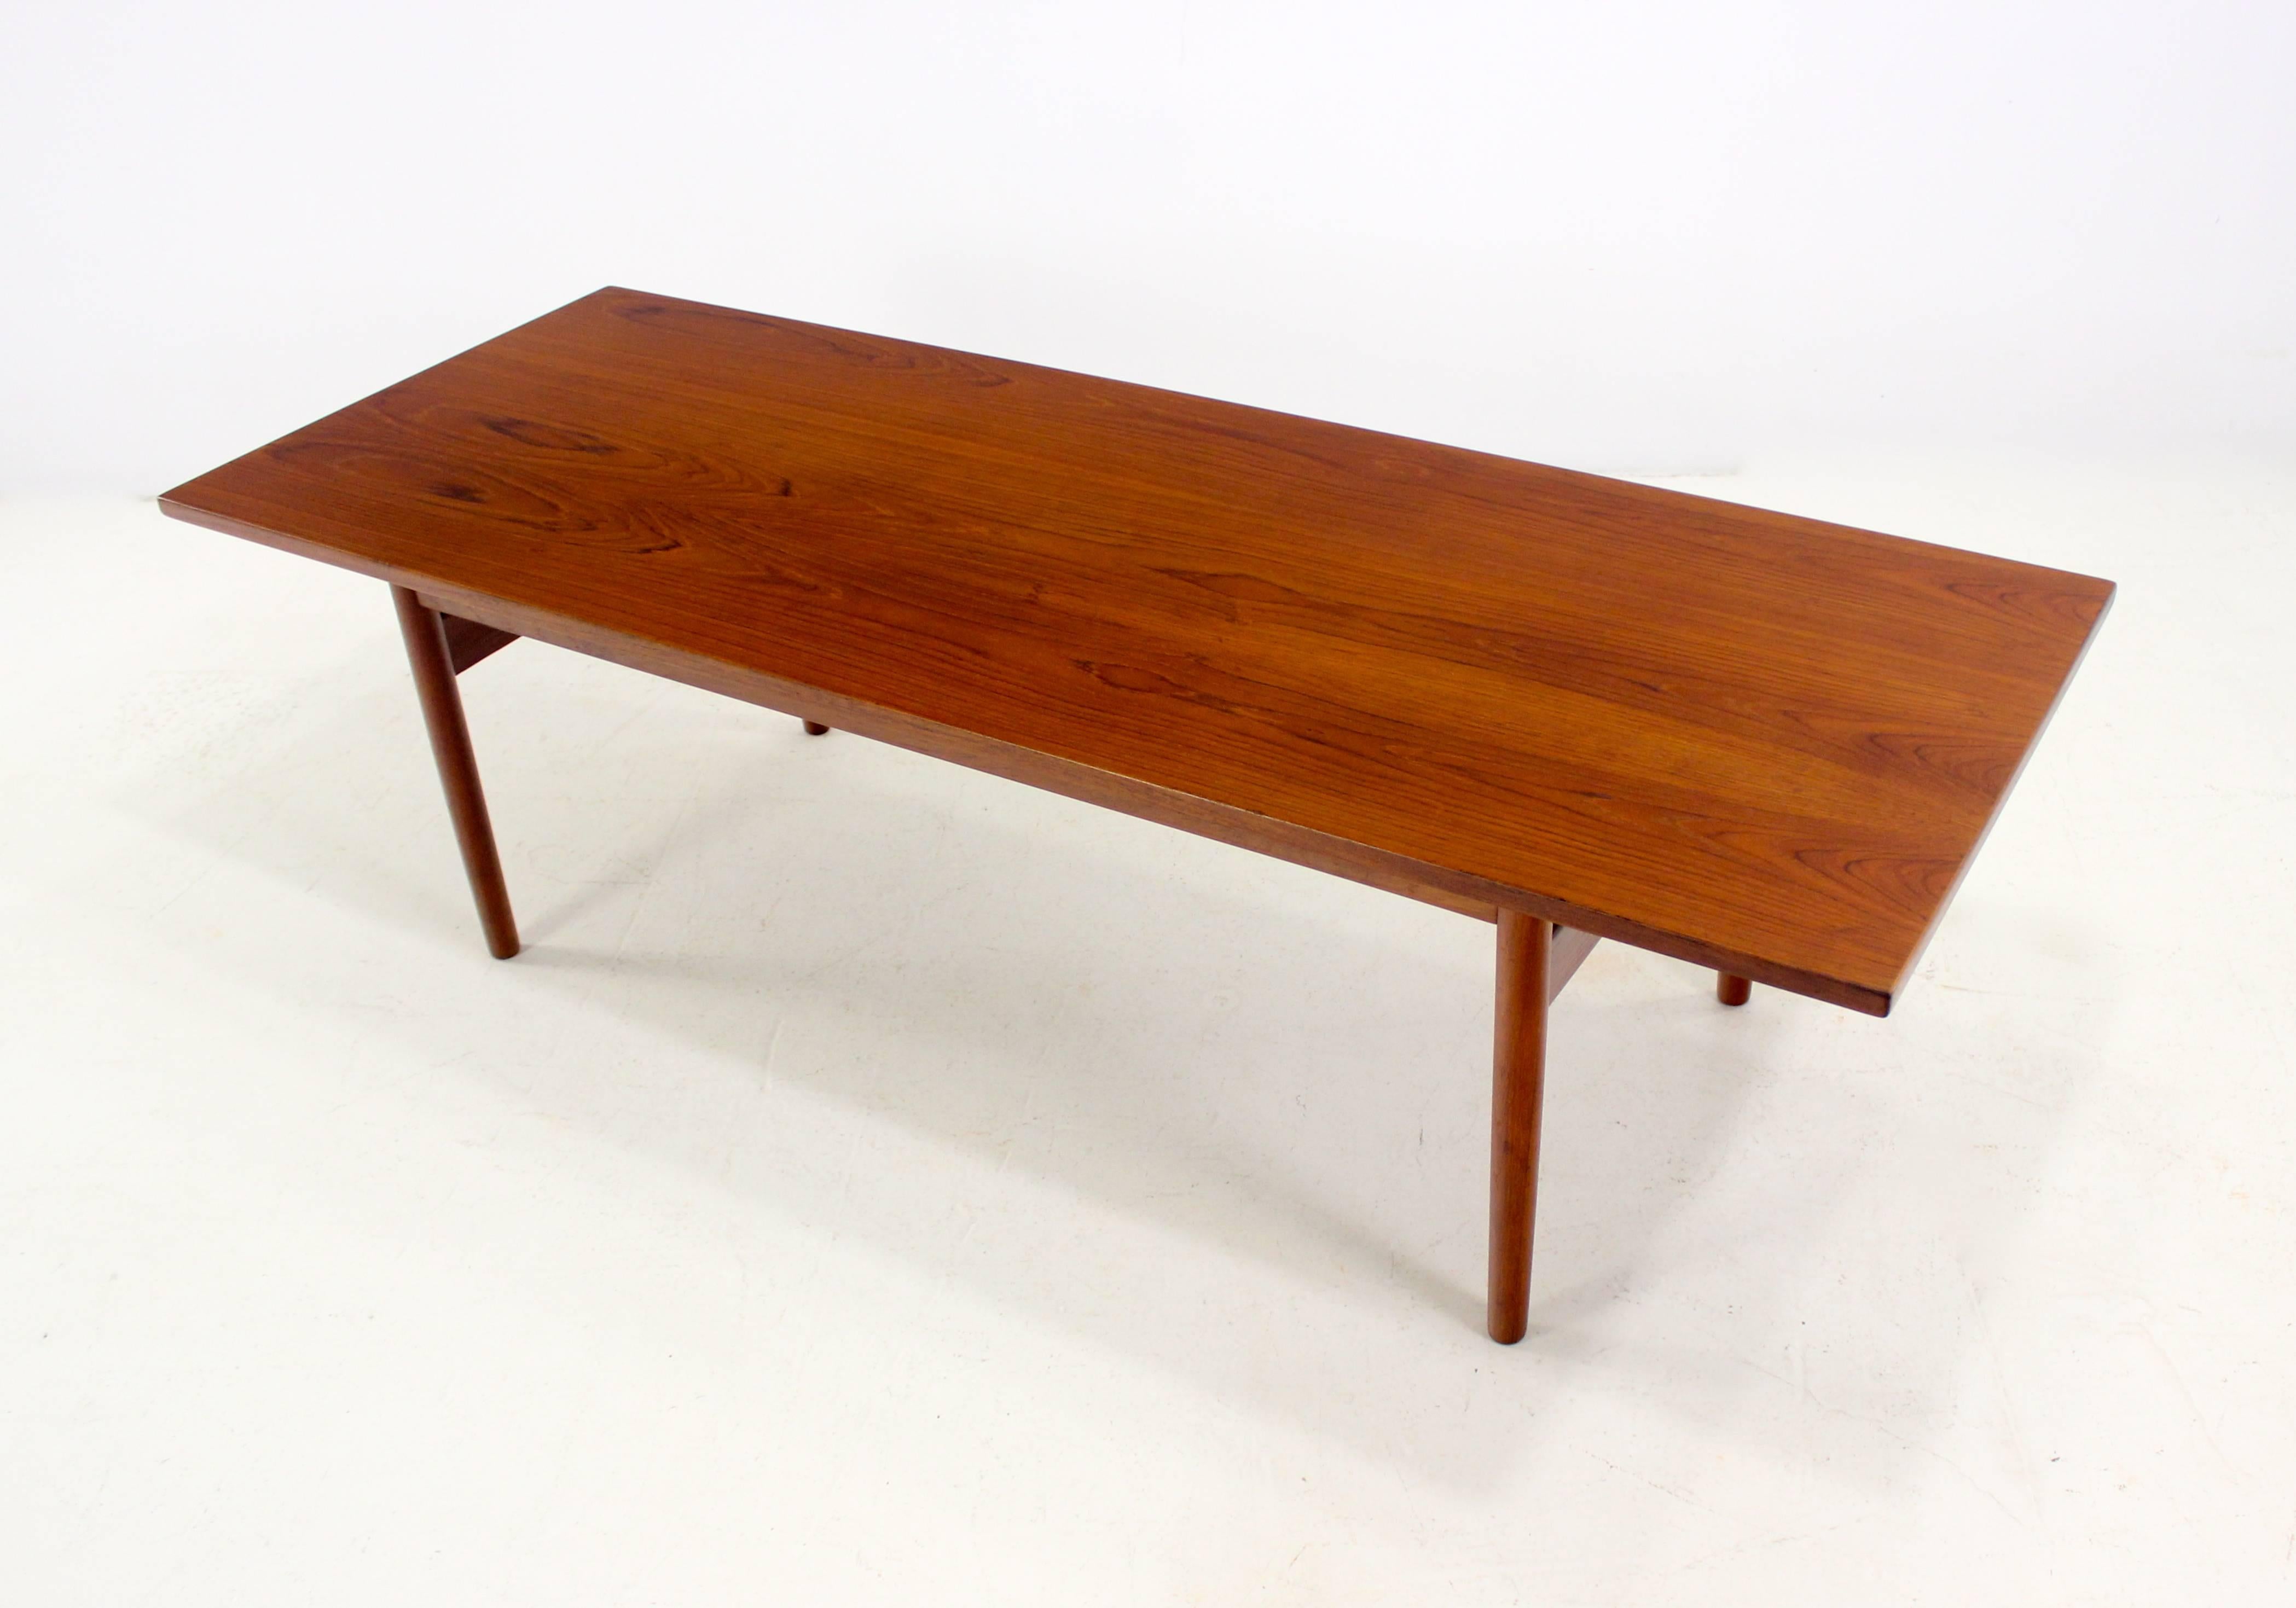 Danish modern coffee table designed by Grete Jalk and Poul Jeppesen.
Richly grained teak with solid, minimalist lines.
Professionally restored and refinished by LookModern.
Matchless quality and price.
Low freight, quick ship.
 
 

